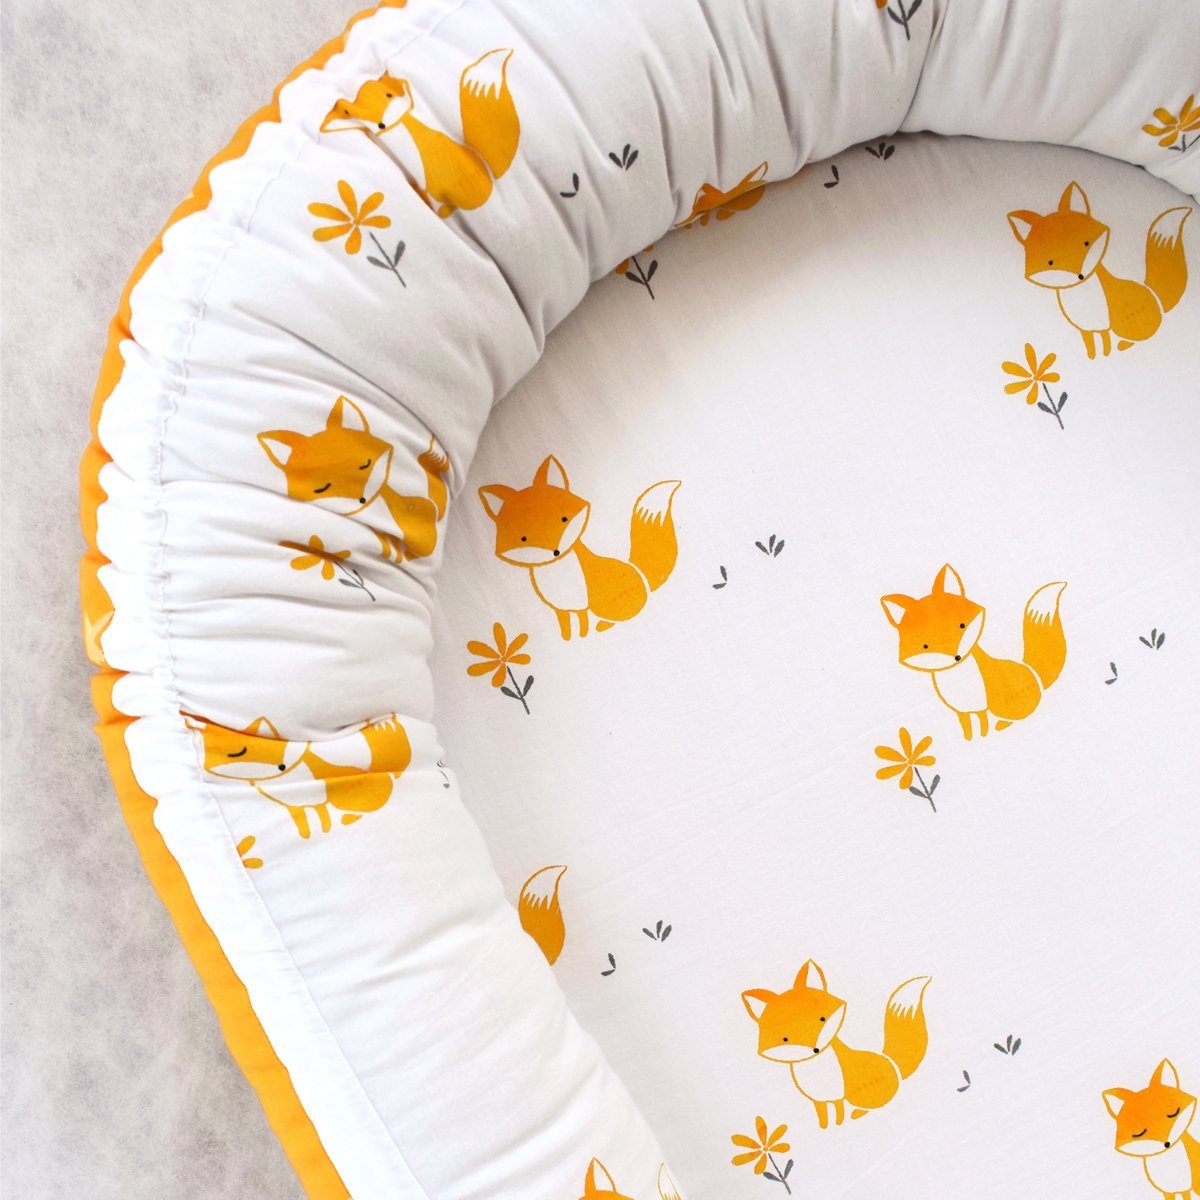 4 Reasons You're Going to Want A Baby Nest For Your Newborn